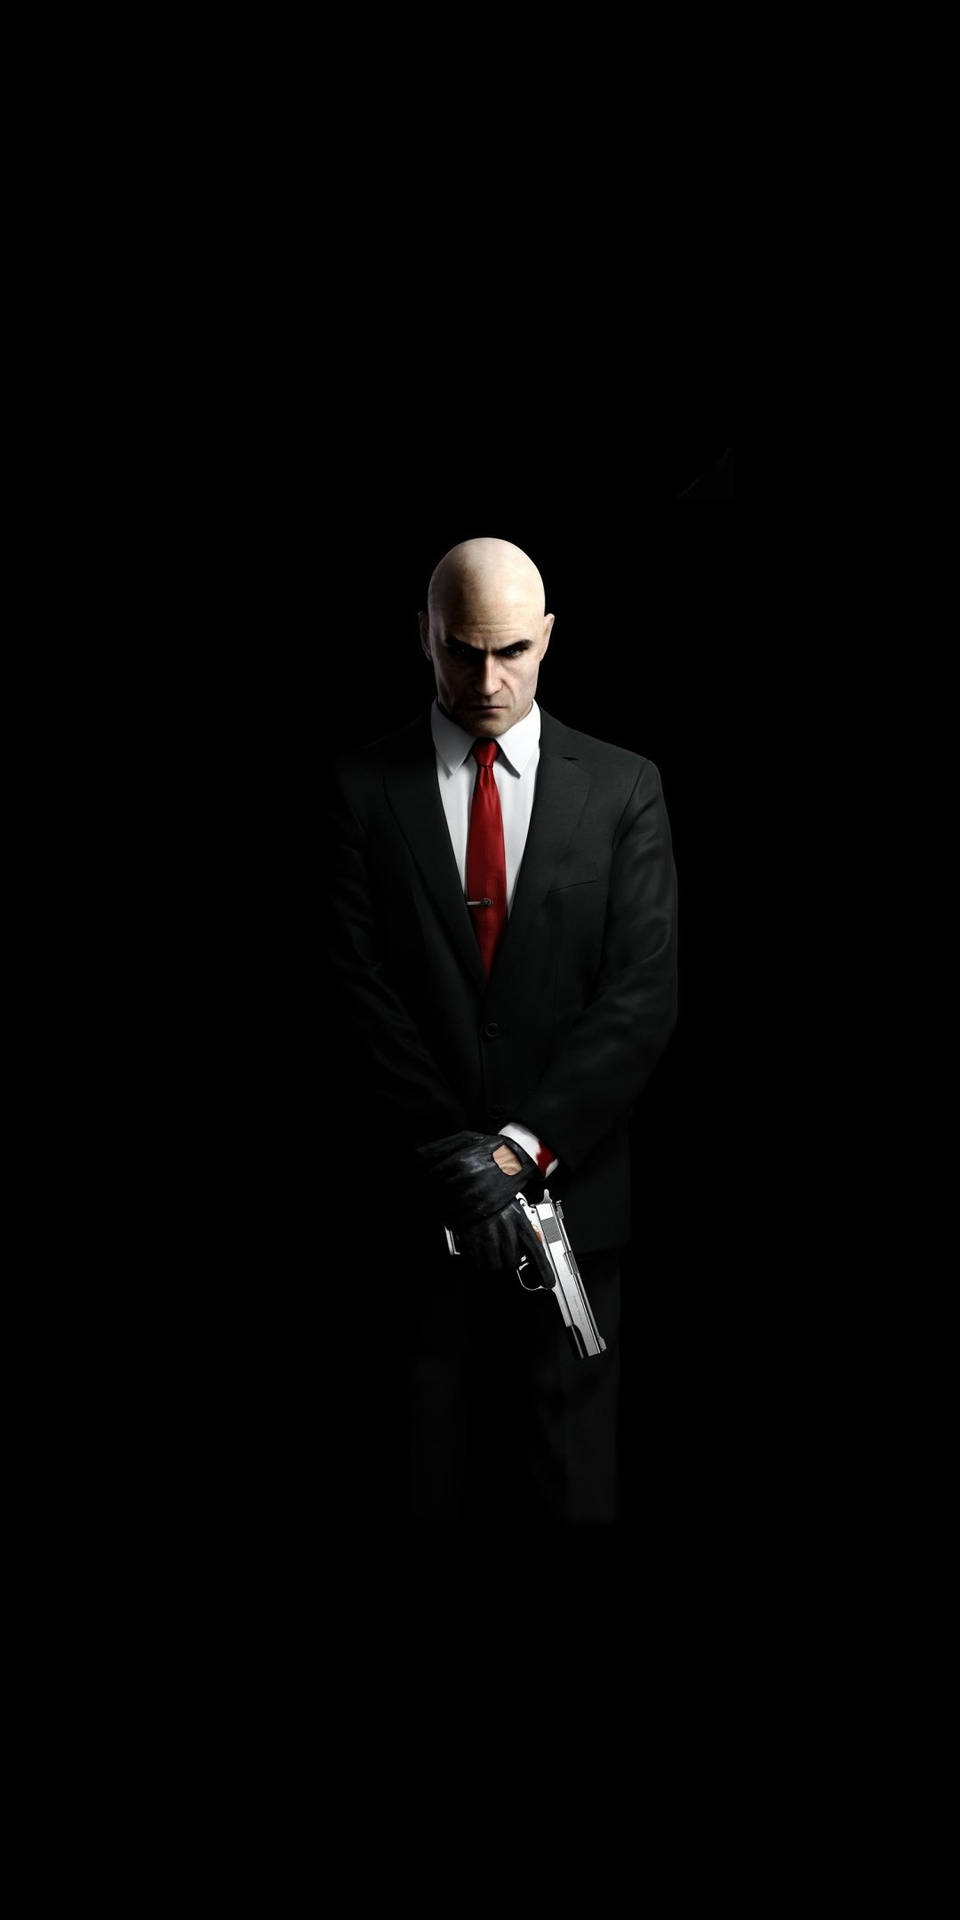 Give yourself the edge with Hitman Phone Wallpaper